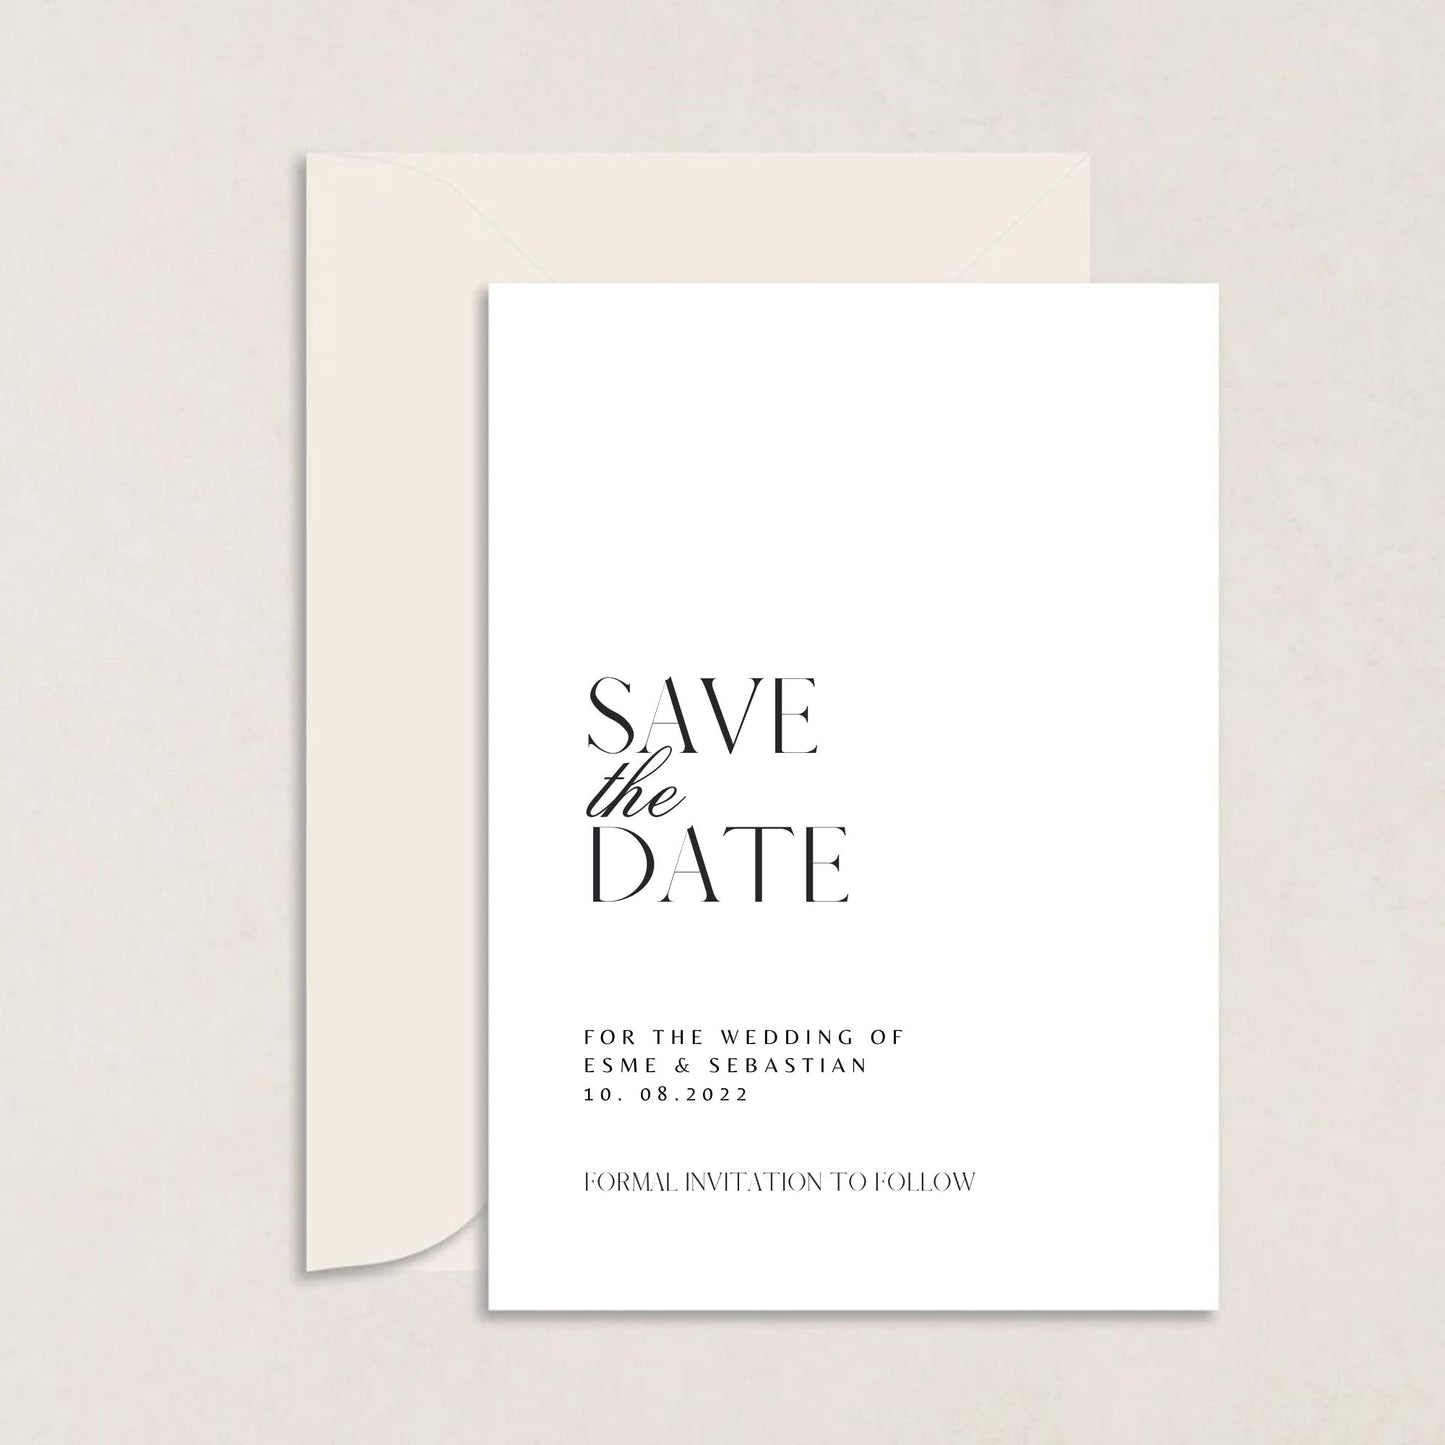 ESME Wedding Save the Date - Wedding Invitations available at The Ivy Collection | Luxury Wedding Stationery